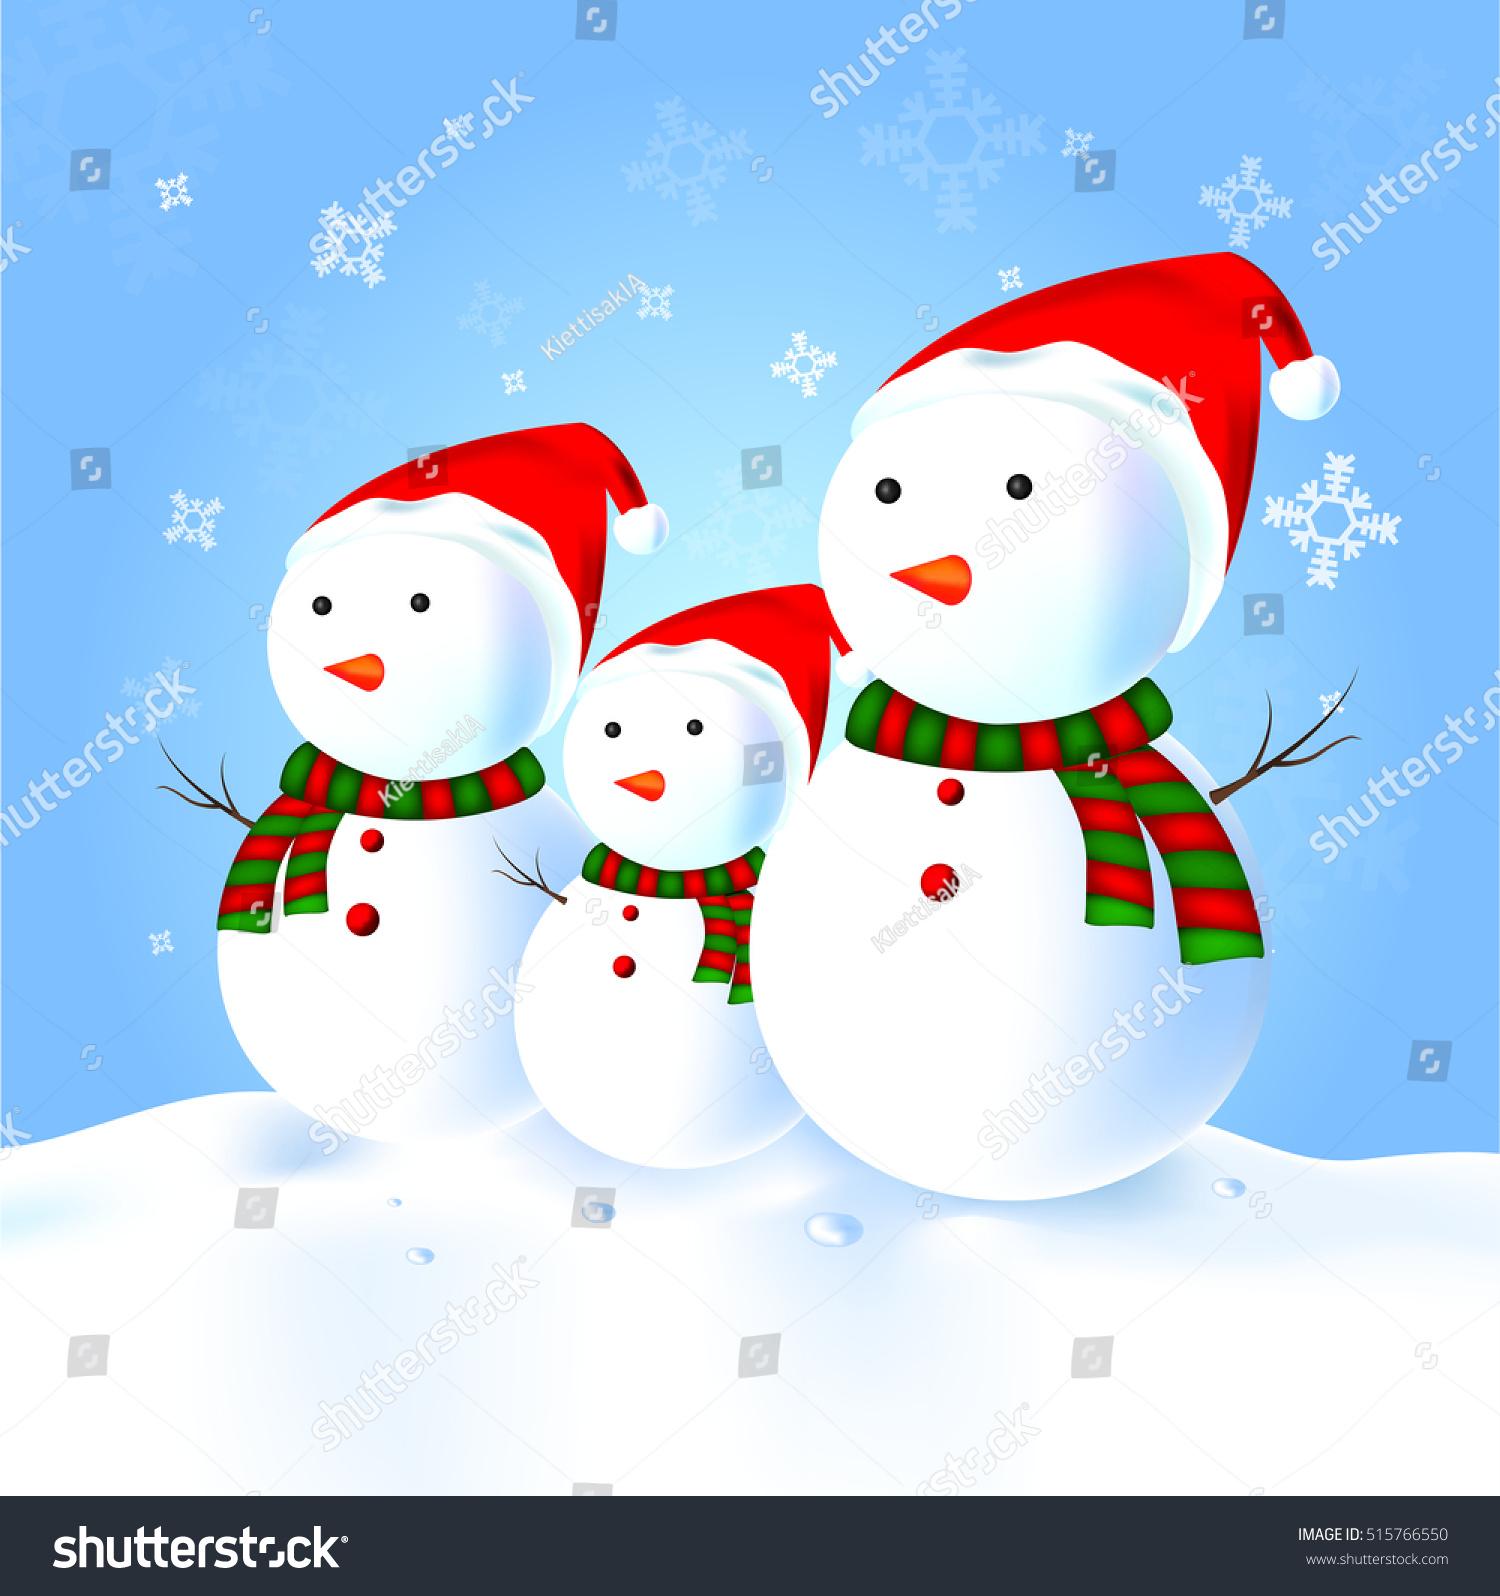 Download Snowman Family With Hat, Scarf, Snow Stock Vector Illustration 515766550 : Shutterstock